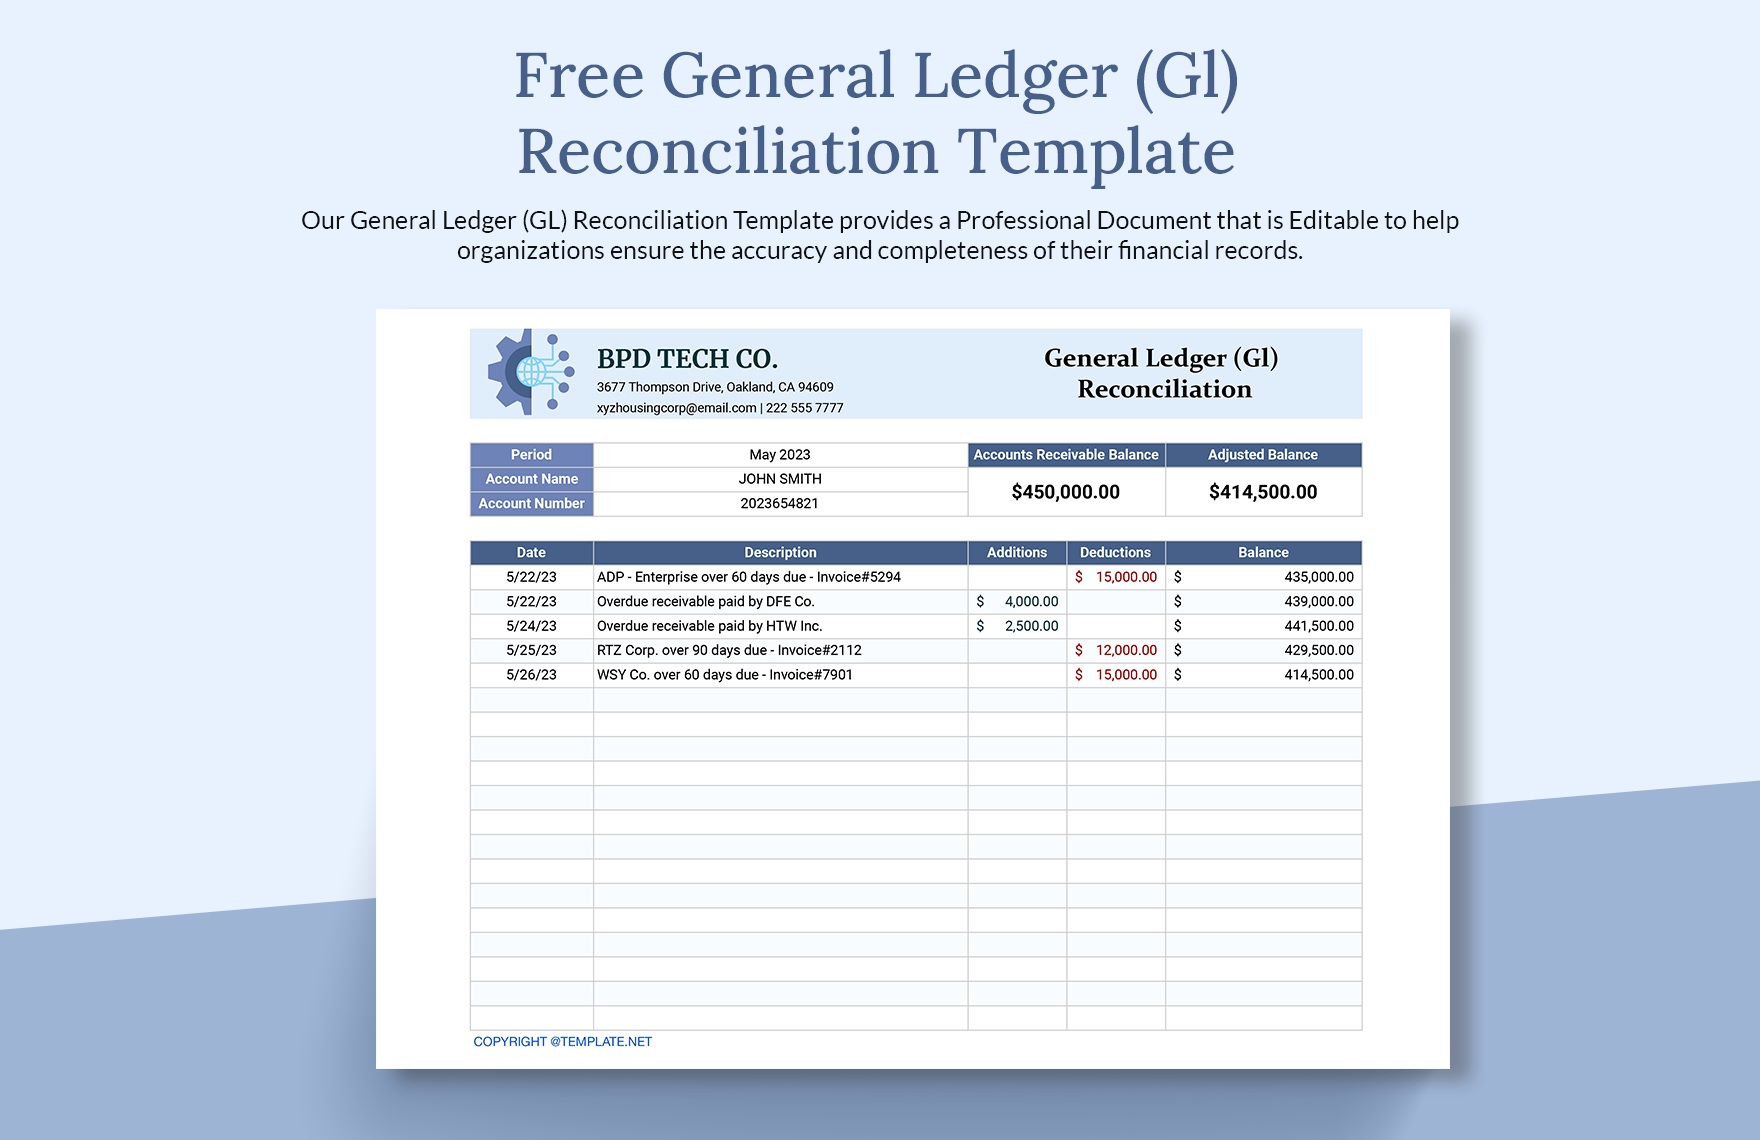 Free General Ledger (Gl) Reconciliation Template